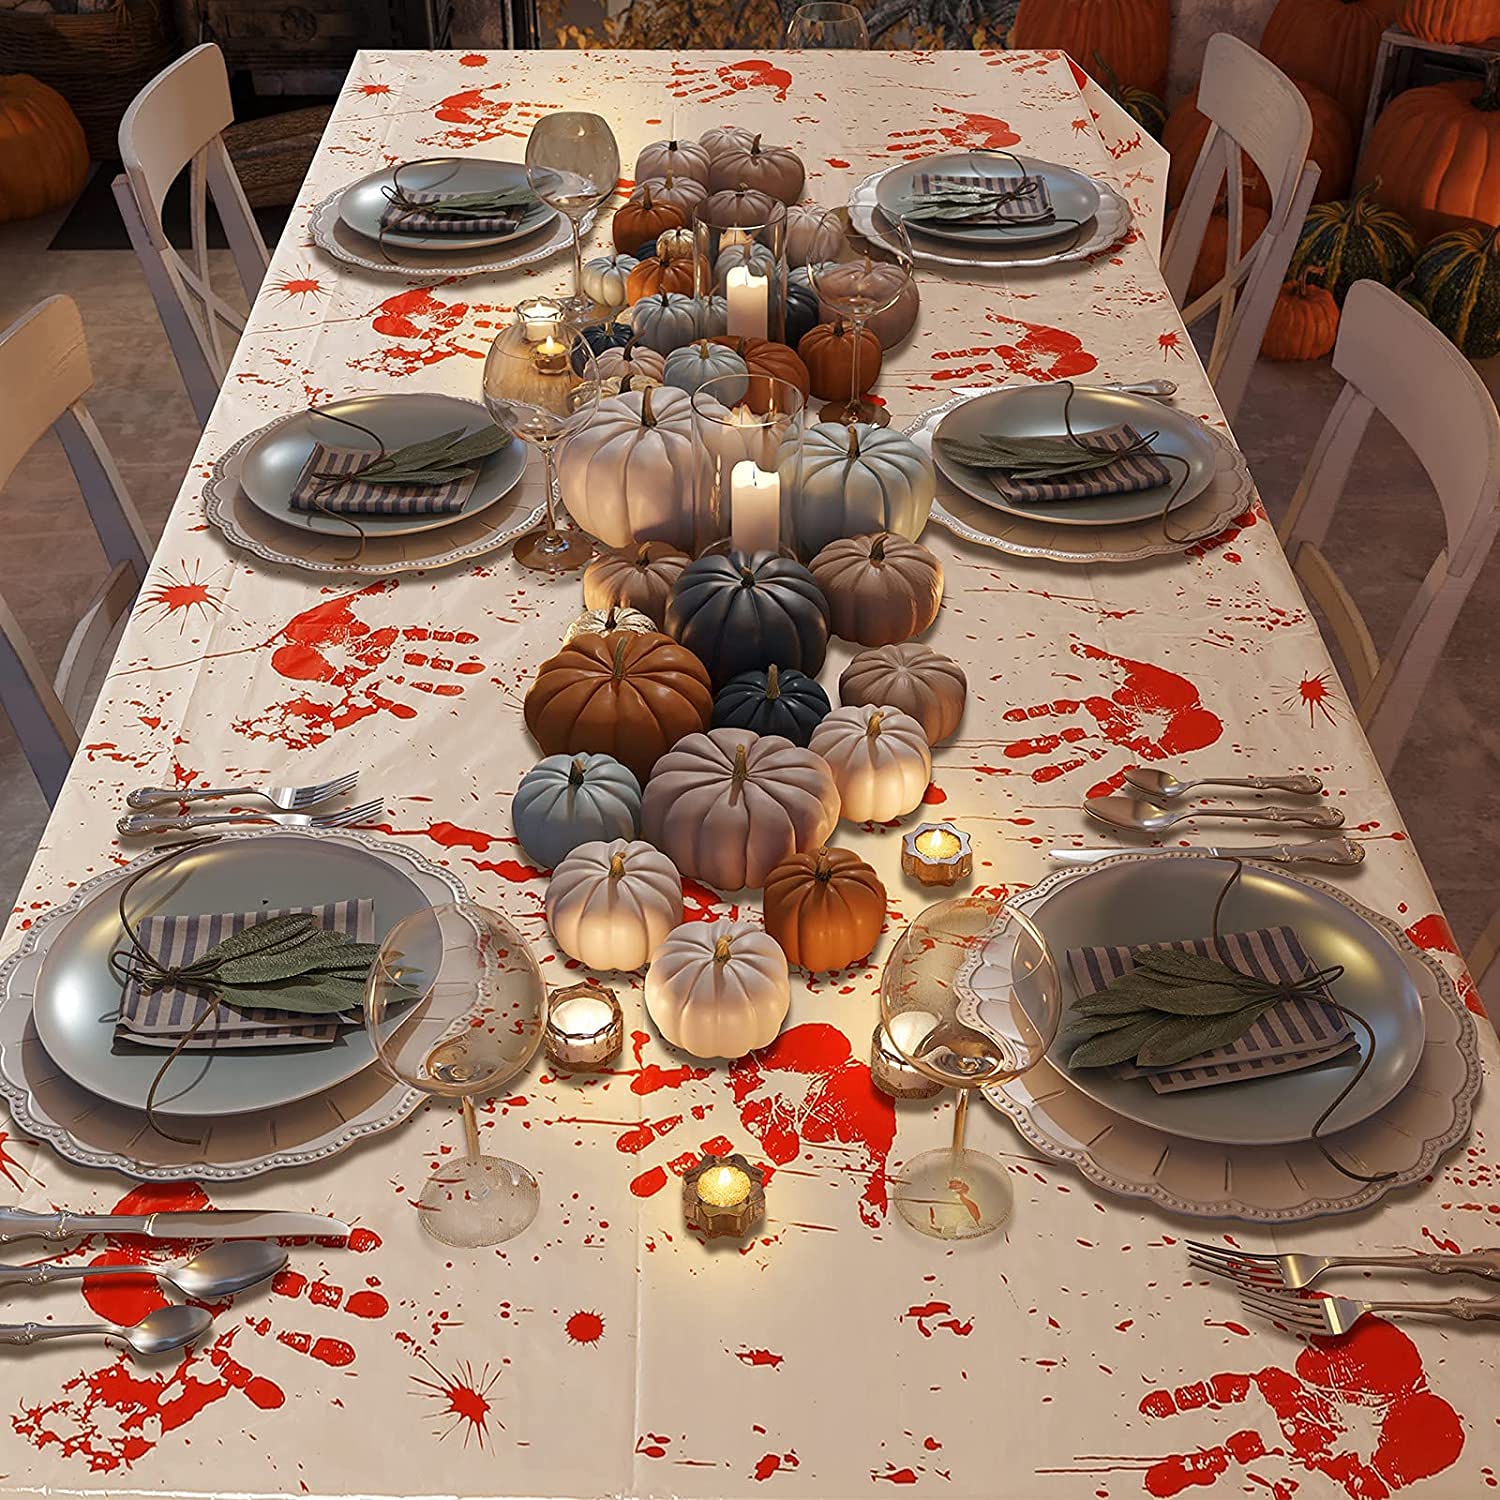 Uaejj Halloween Decorations, Scary Party Decoration Set, Bloody Halloween Party Supplies Include Bloody Handprint Stickers Banner Bloody Tablecloth, (B-Tablecloth)